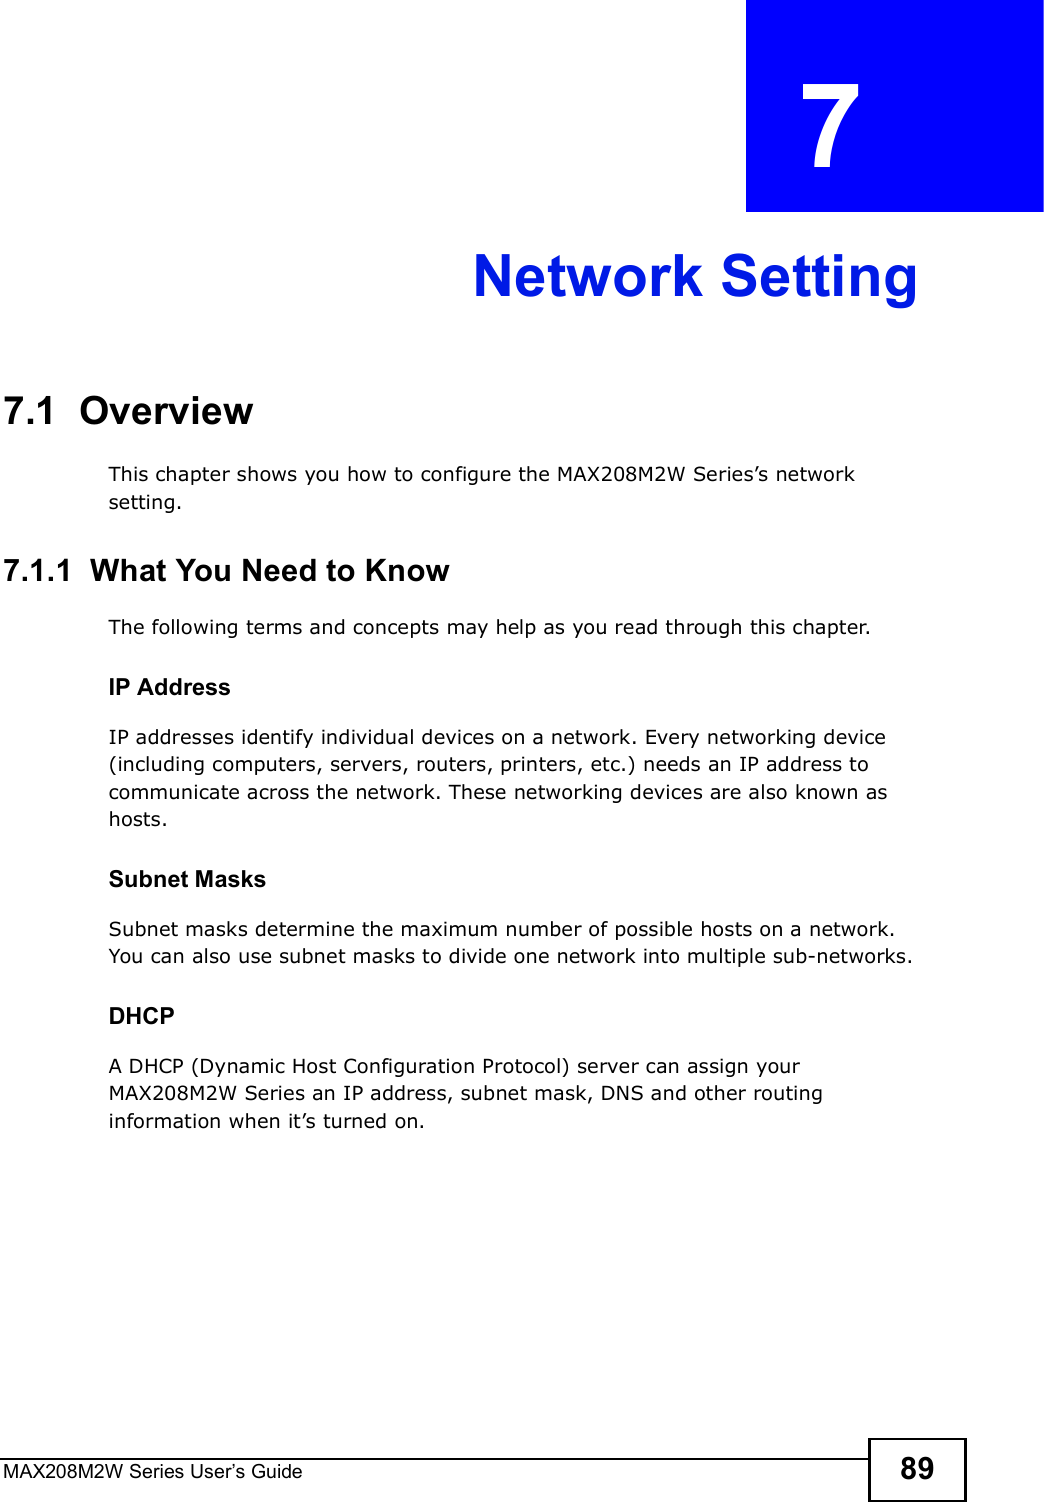 MAX208M2W Series User s Guide 89CHAPTER  7 Network Setting7.1  OverviewThis chapter shows you how to configure the MAX208M2W Series s network setting.7.1.1  What You Need to KnowThe following terms and concepts may help as you read through this chapter.IP AddressIP addresses identify individual devices on a network. Every networking device (including computers, servers, routers, printers, etc.) needs an IP address to communicate across the network. These networking devices are also known as hosts.Subnet MasksSubnet masks determine the maximum number of possible hosts on a network. You can also use subnet masks to divide one network into multiple sub-networks.DHCPA DHCP (Dynamic Host Configuration Protocol) server can assign your MAX208M2W Series an IP address, subnet mask, DNS and other routing information when it s turned on.